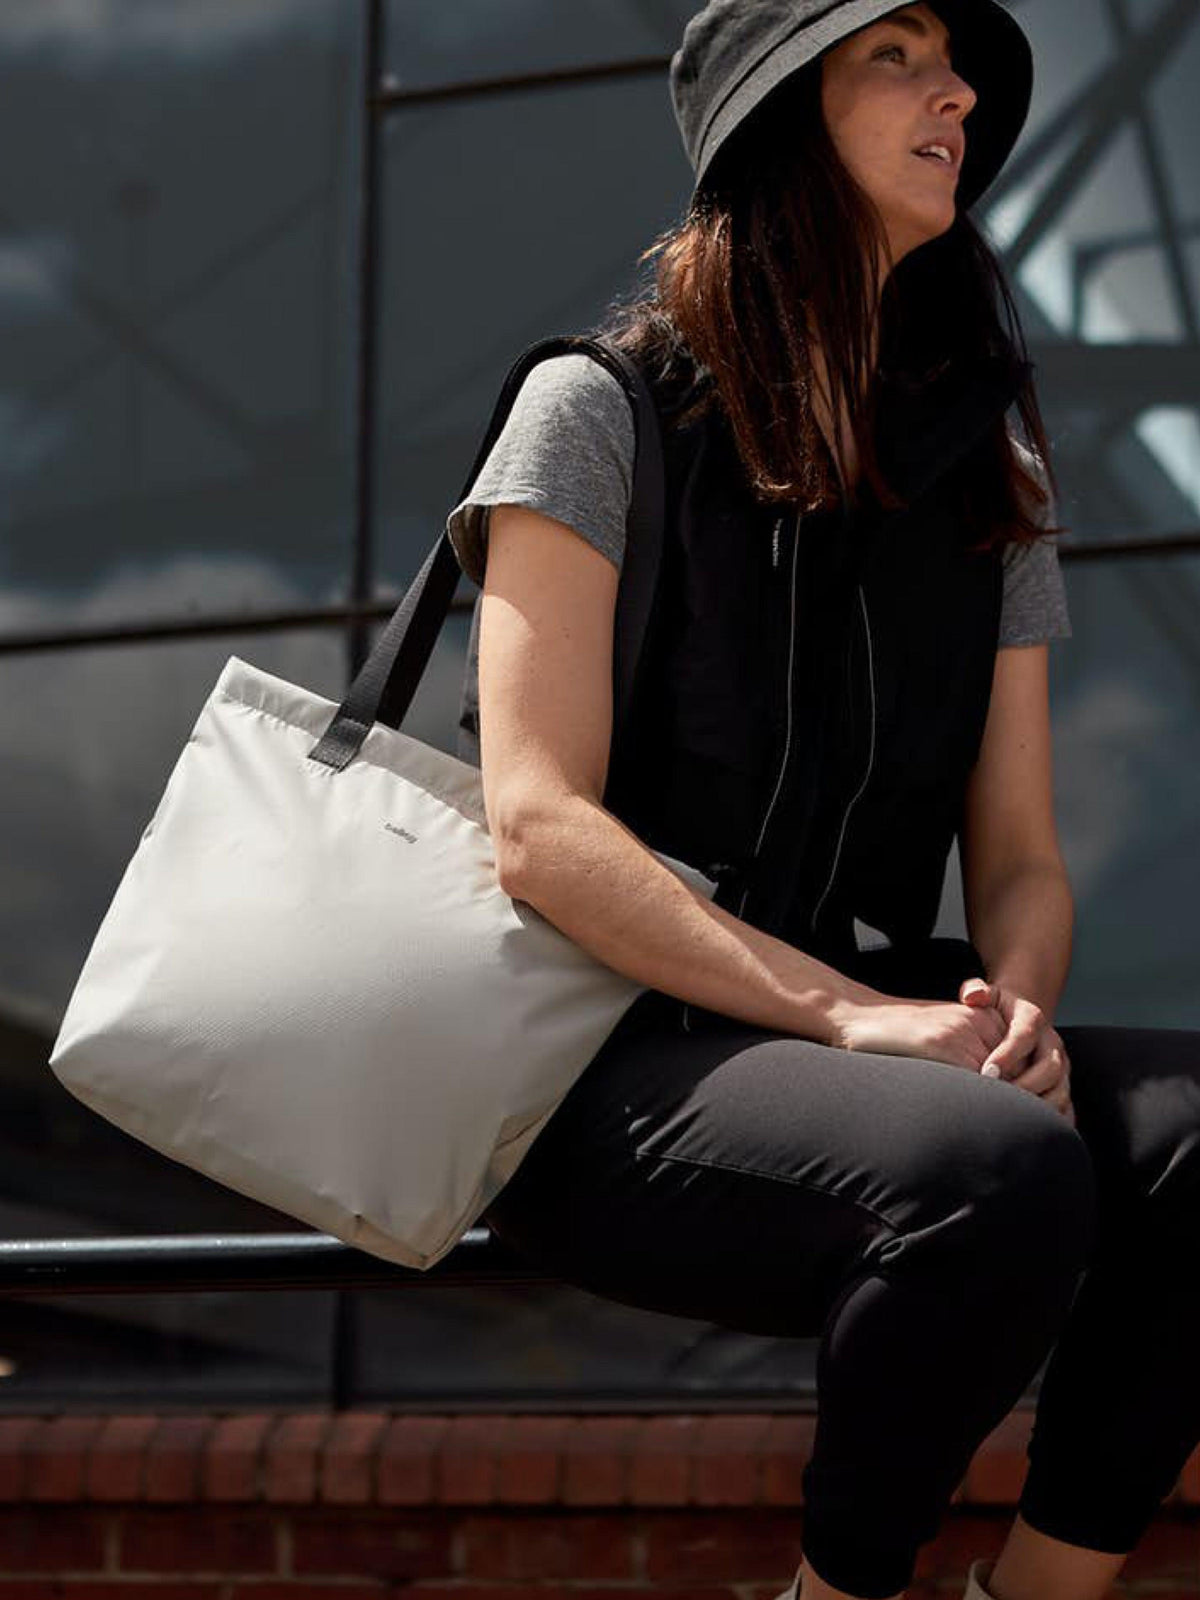 Bellroy Lite Tote Shadow (Leather Free)